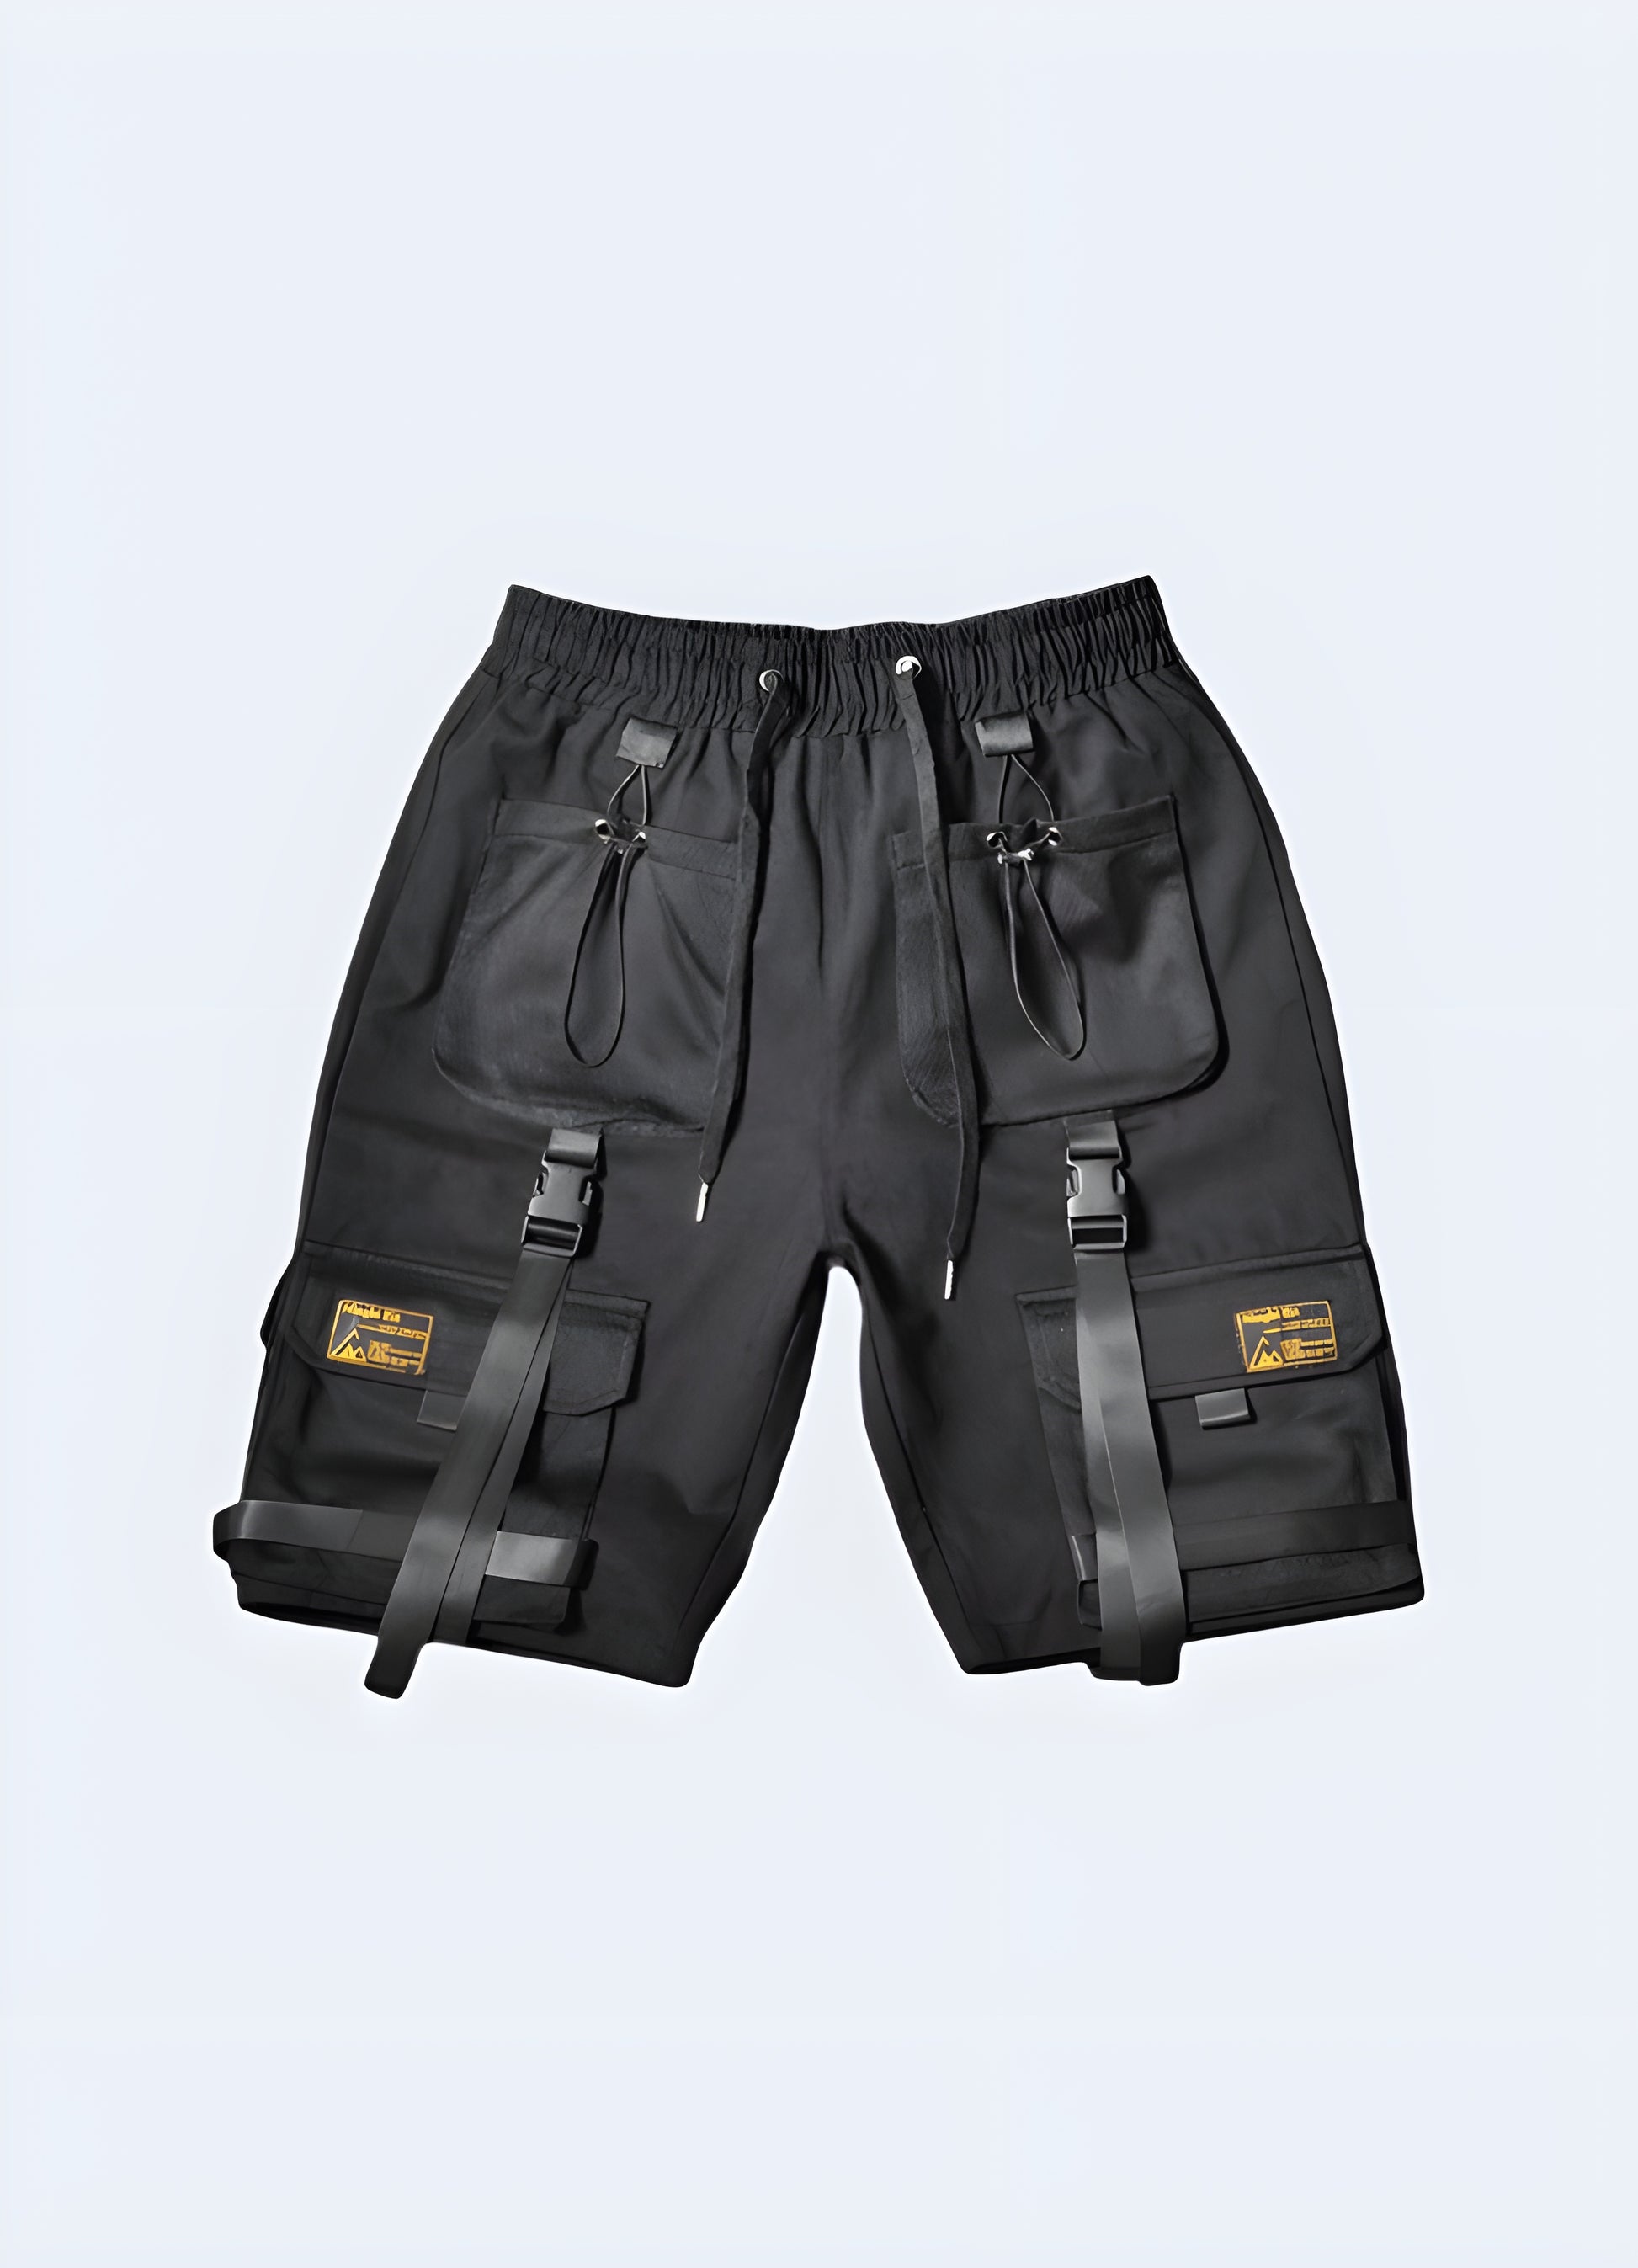 Discover our new streetwear shorts – the epitome of city-life fashion.